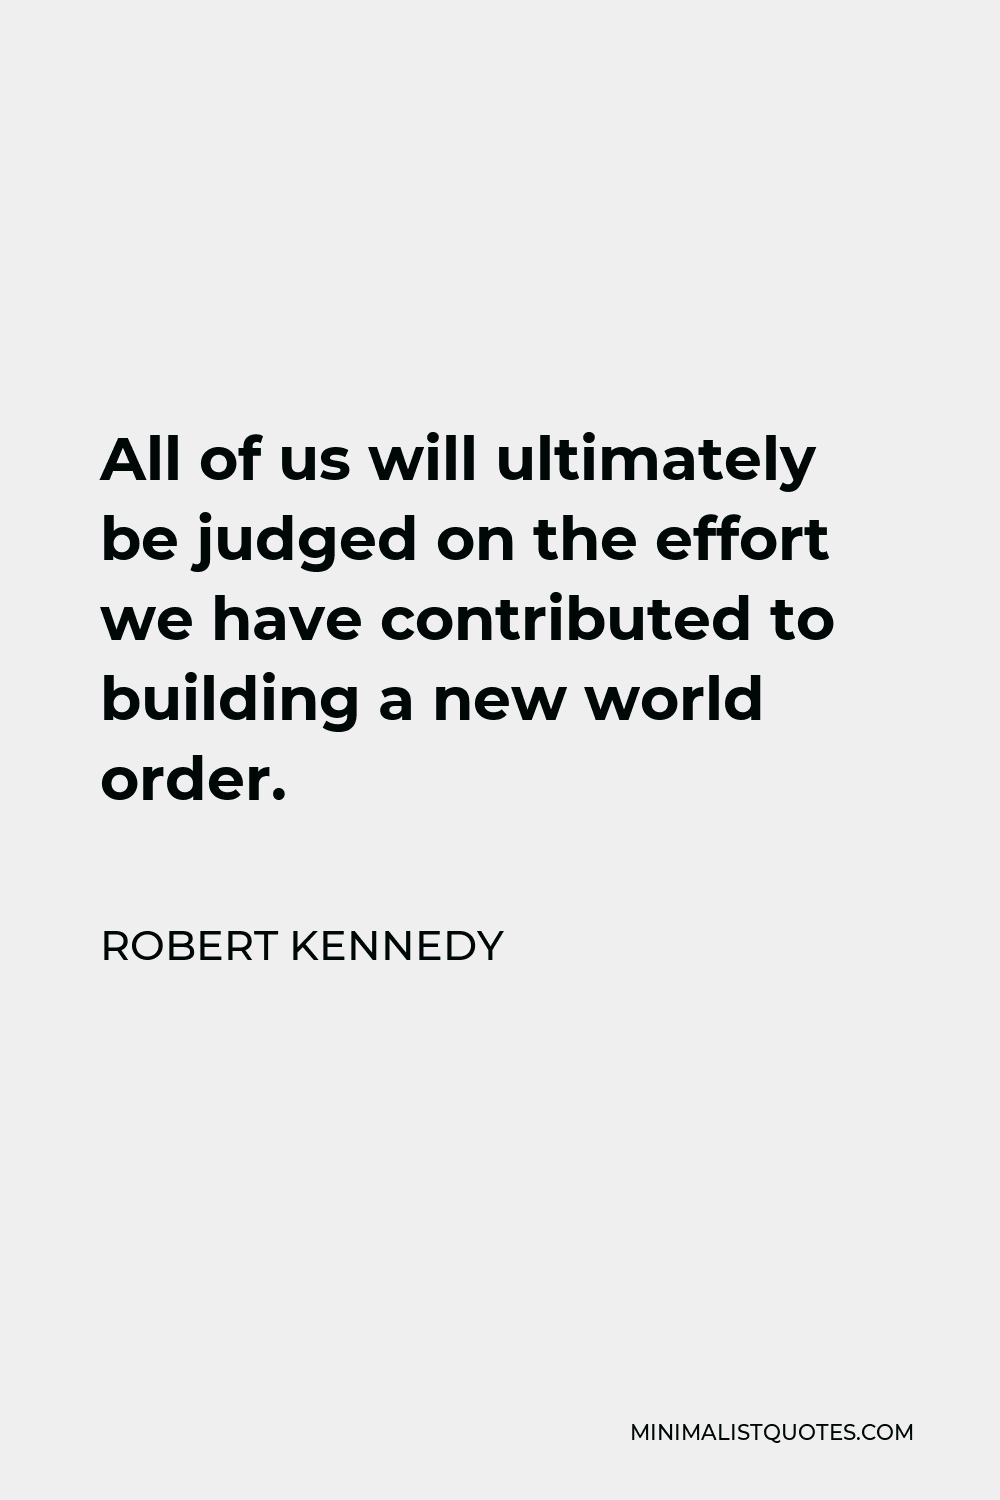 Robert Kennedy Quote - All of us will ultimately be judged on the effort we have contributed to building a new world order.